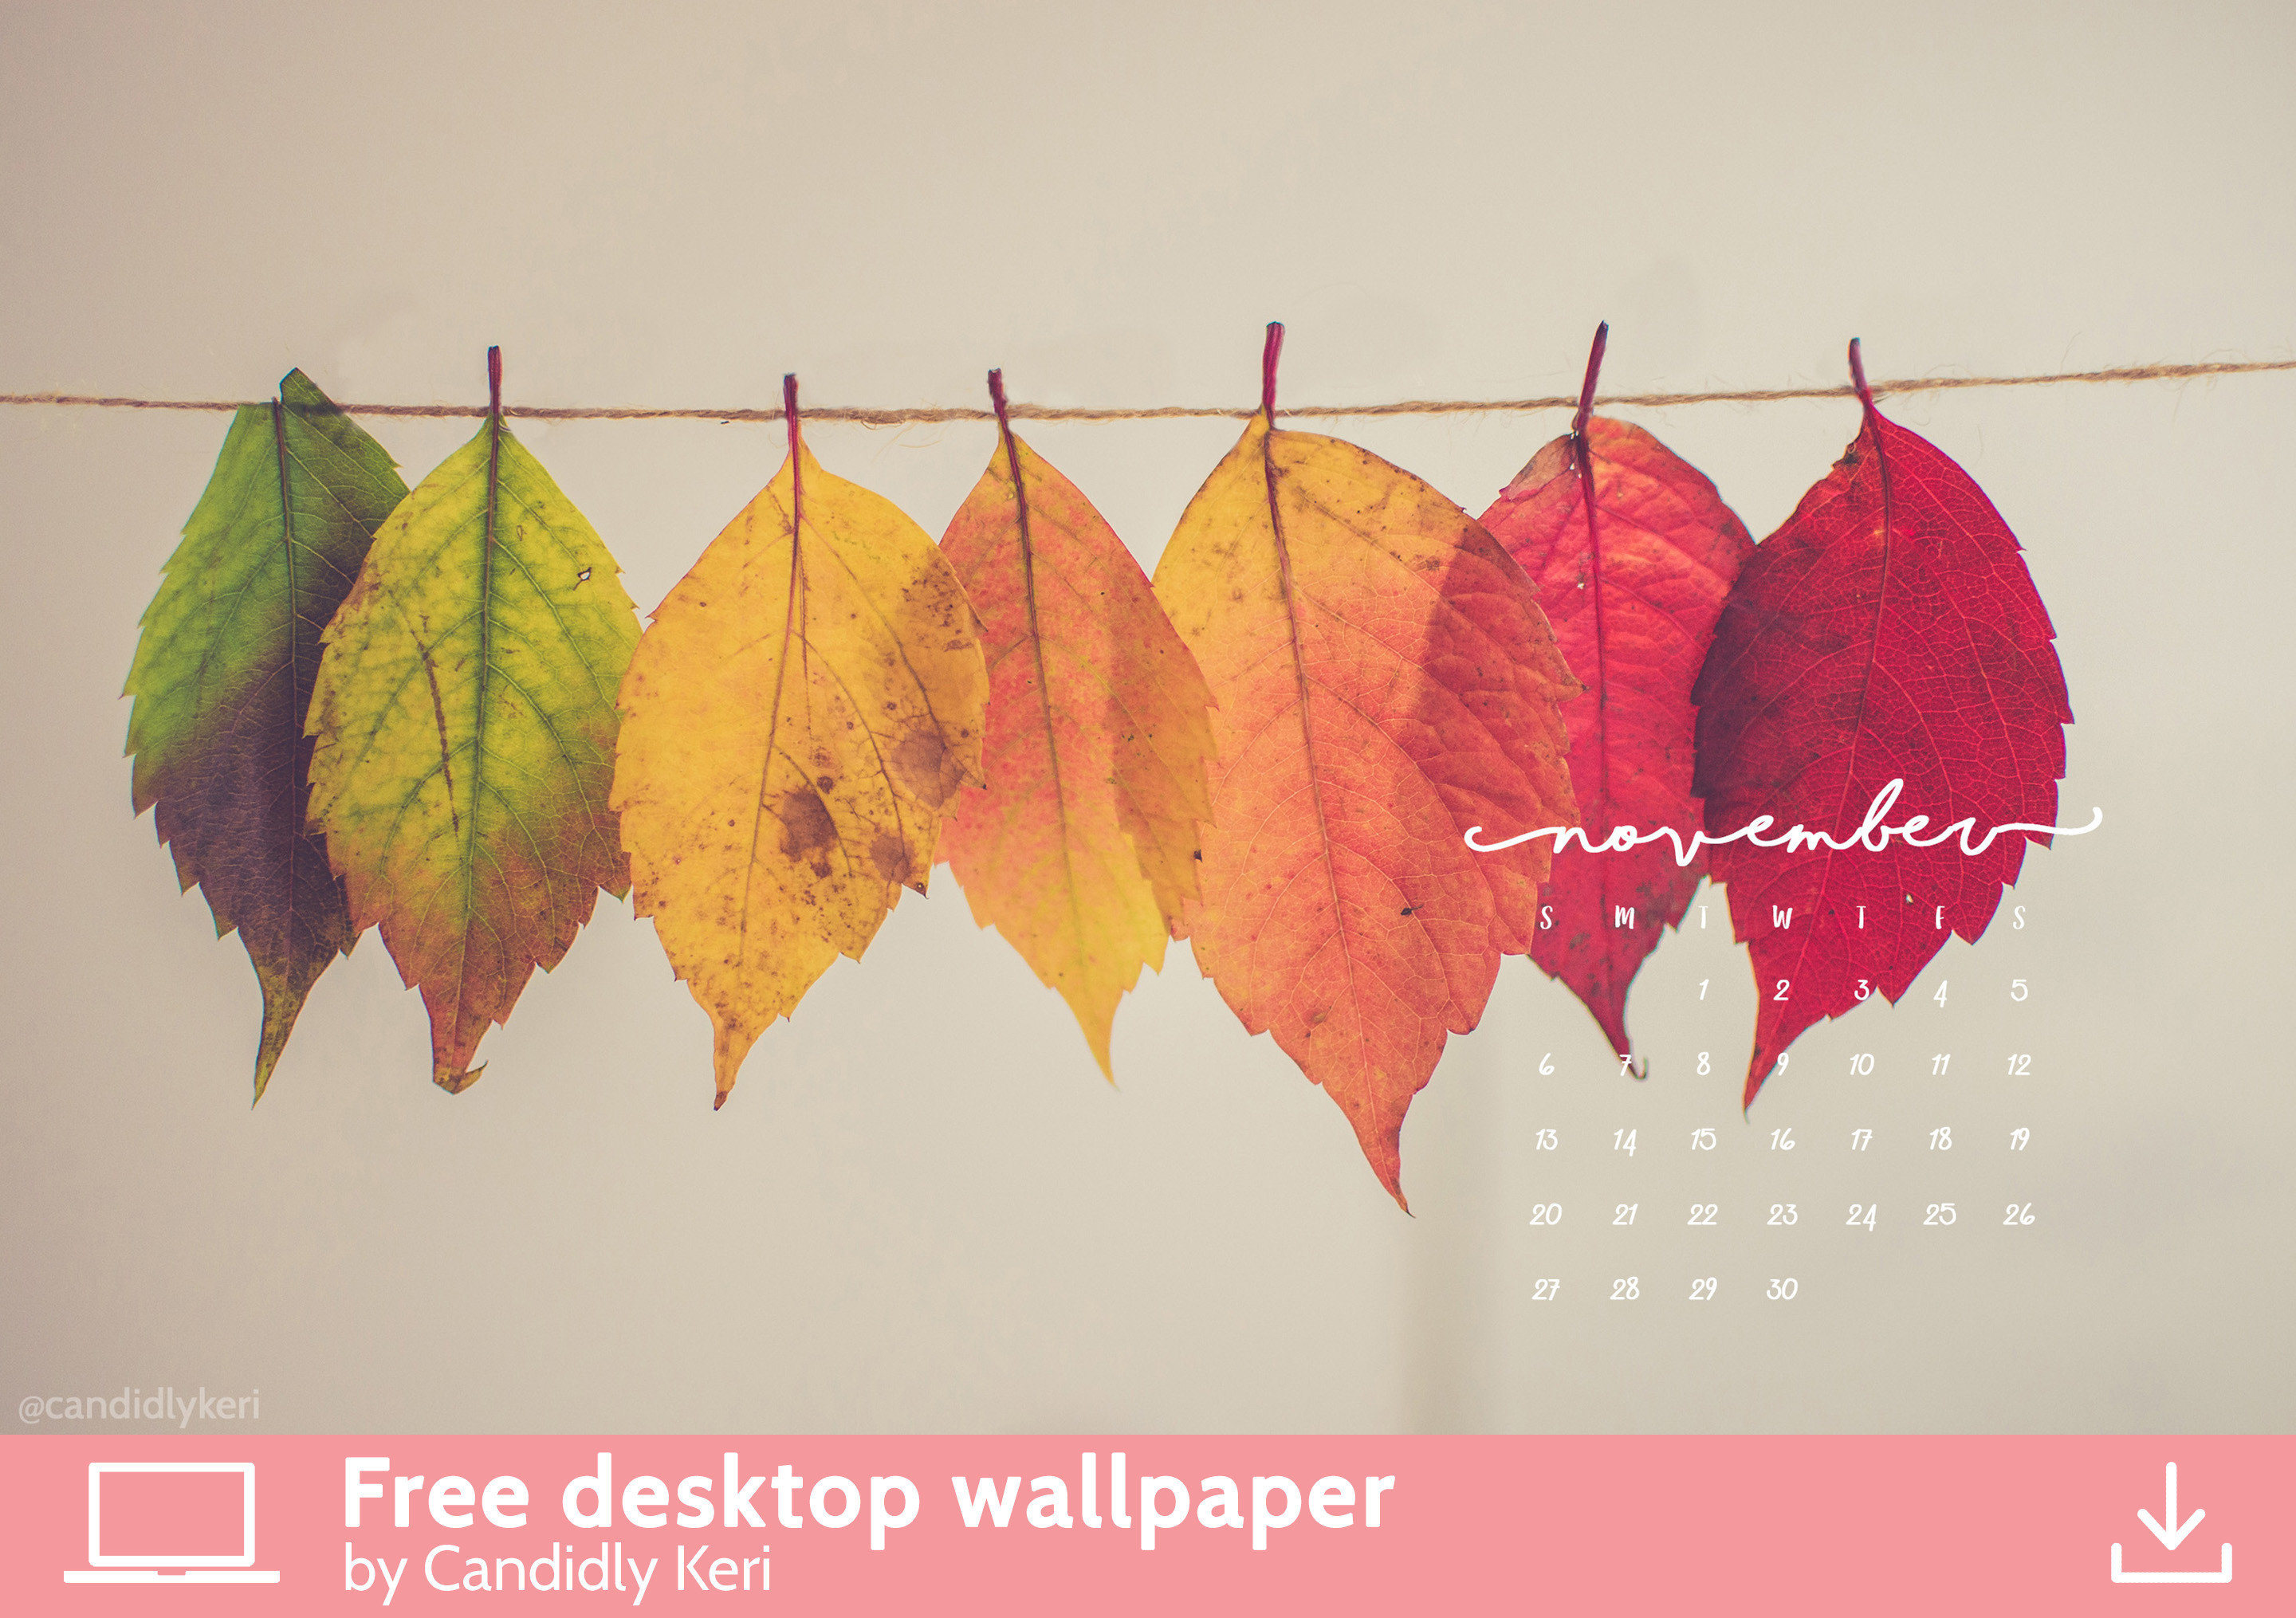 Pretty Leaf photography colorful leaves yellow orange red November calendar 2016 wallpaper you can download for